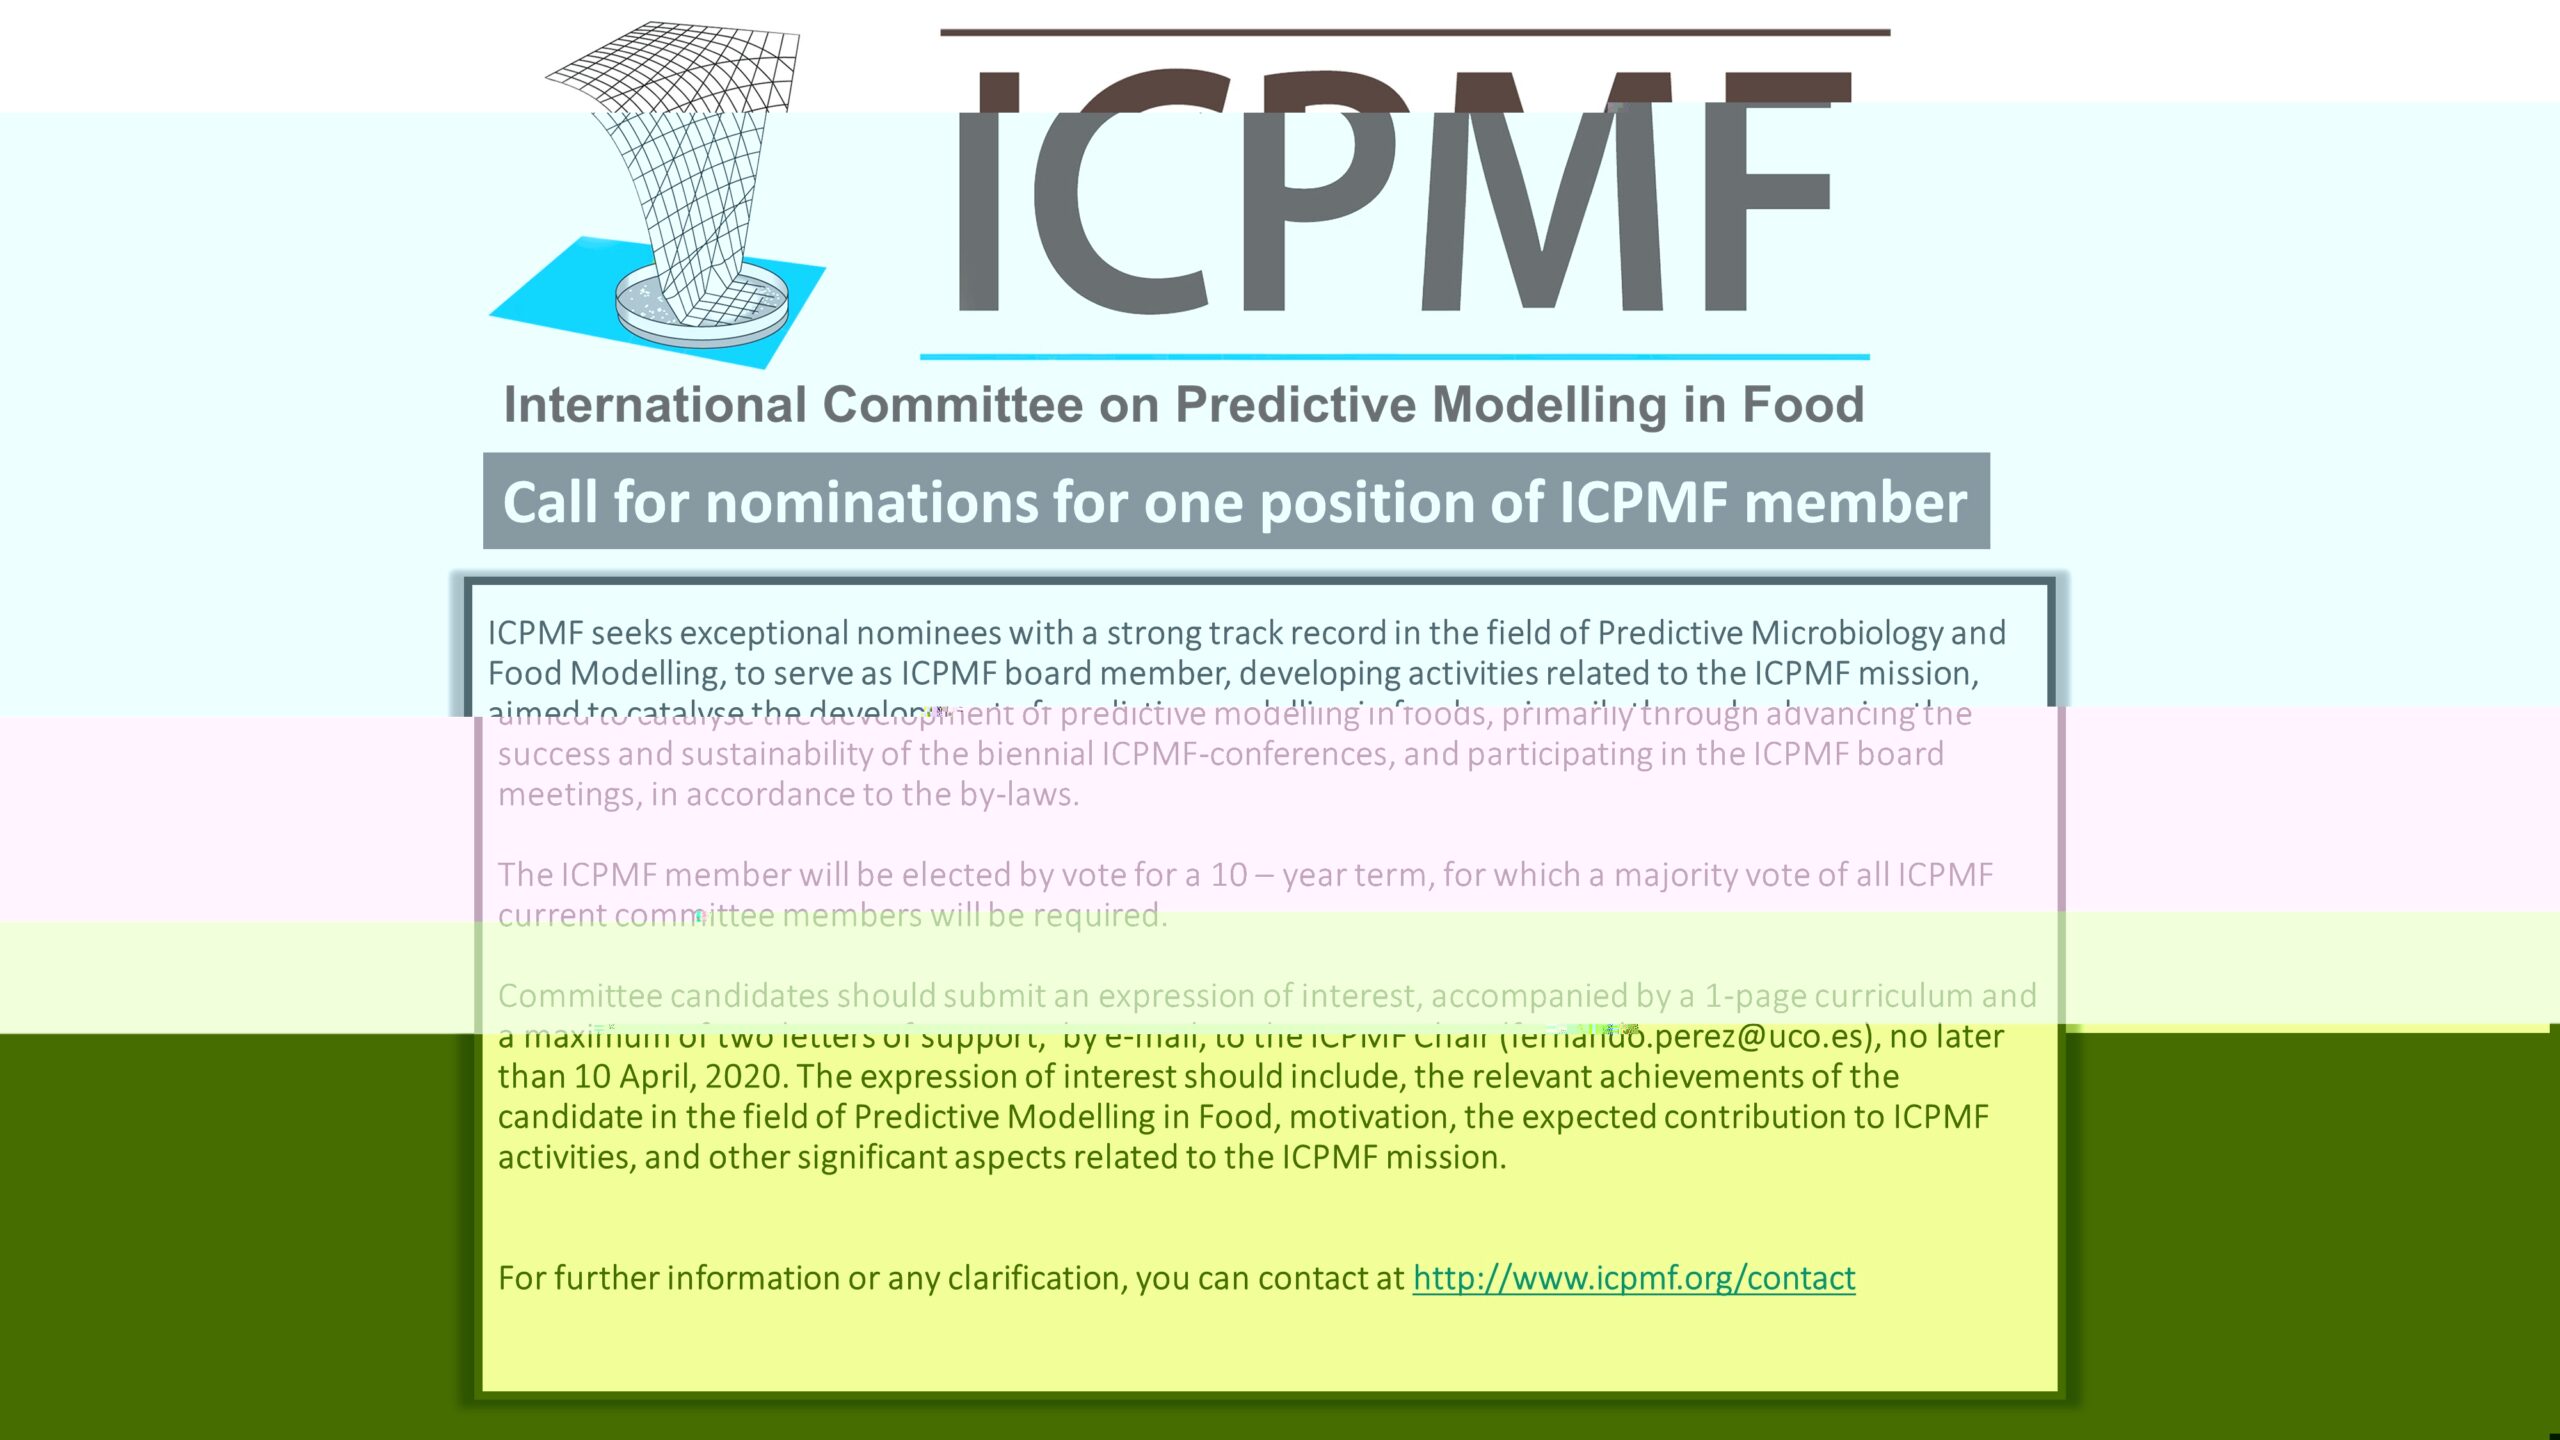 Call for nominations for one position of ICPMF member